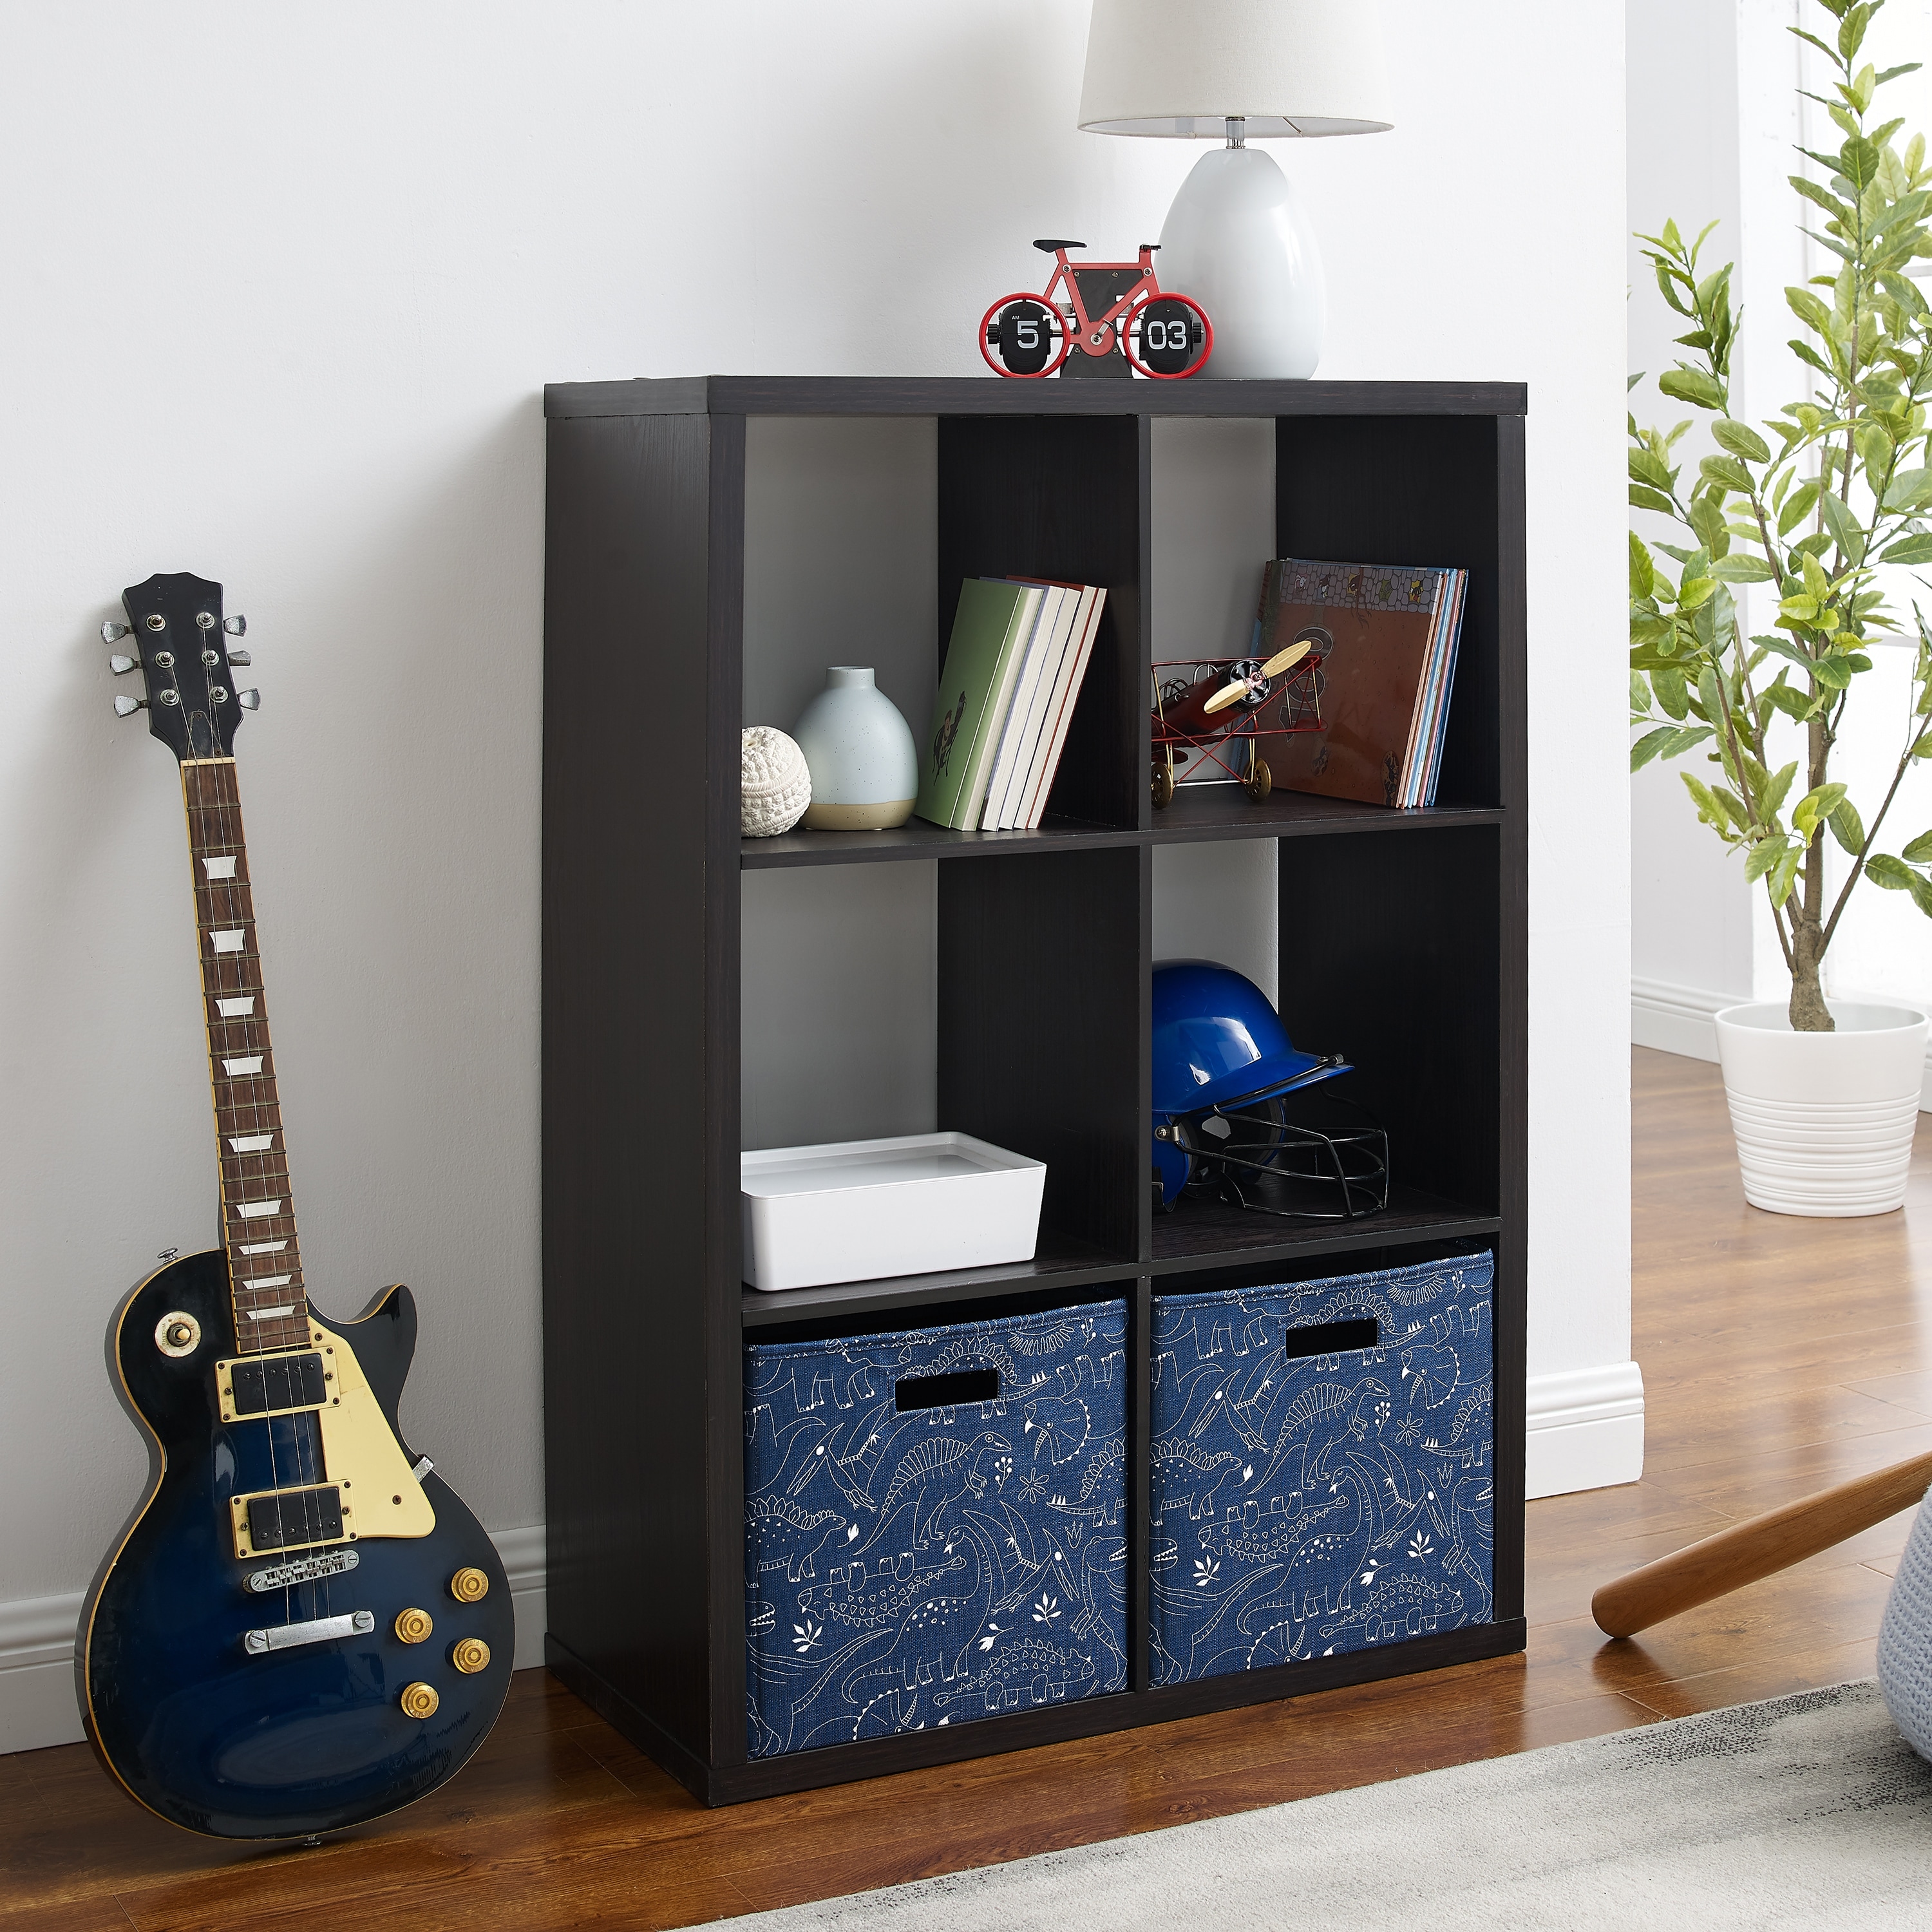 https://ak1.ostkcdn.com/images/products/is/images/direct/10956a7d37405d6c739aae53dc8df16409e60bf8/Alaric-6-Cubby-Storage-Cabinet.jpg